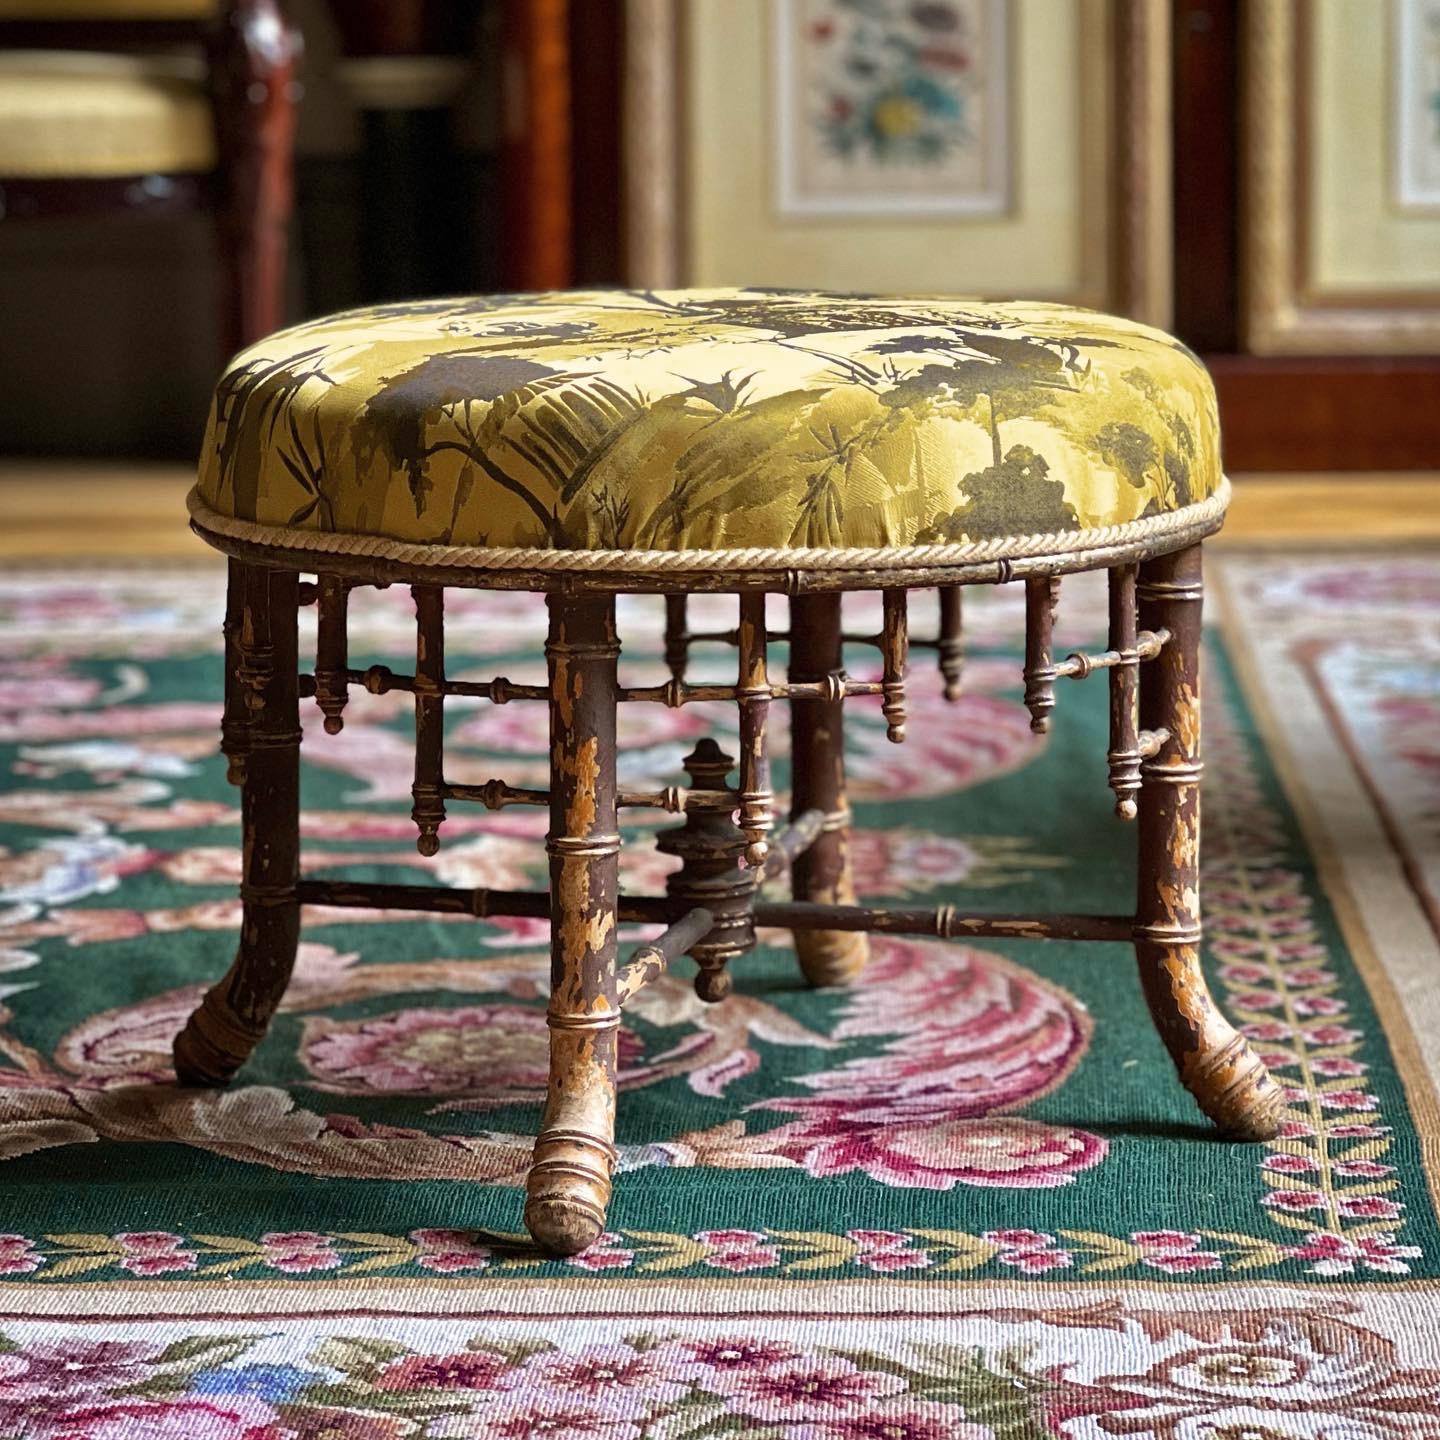 A very decorative 19th century stool in the chinoiserie taste, the circular frame carved to simulate bamboo in the Regency Brighton Pavilion manner, retaining traces its original painted and gilt decoration and covered in modern imperial yellow